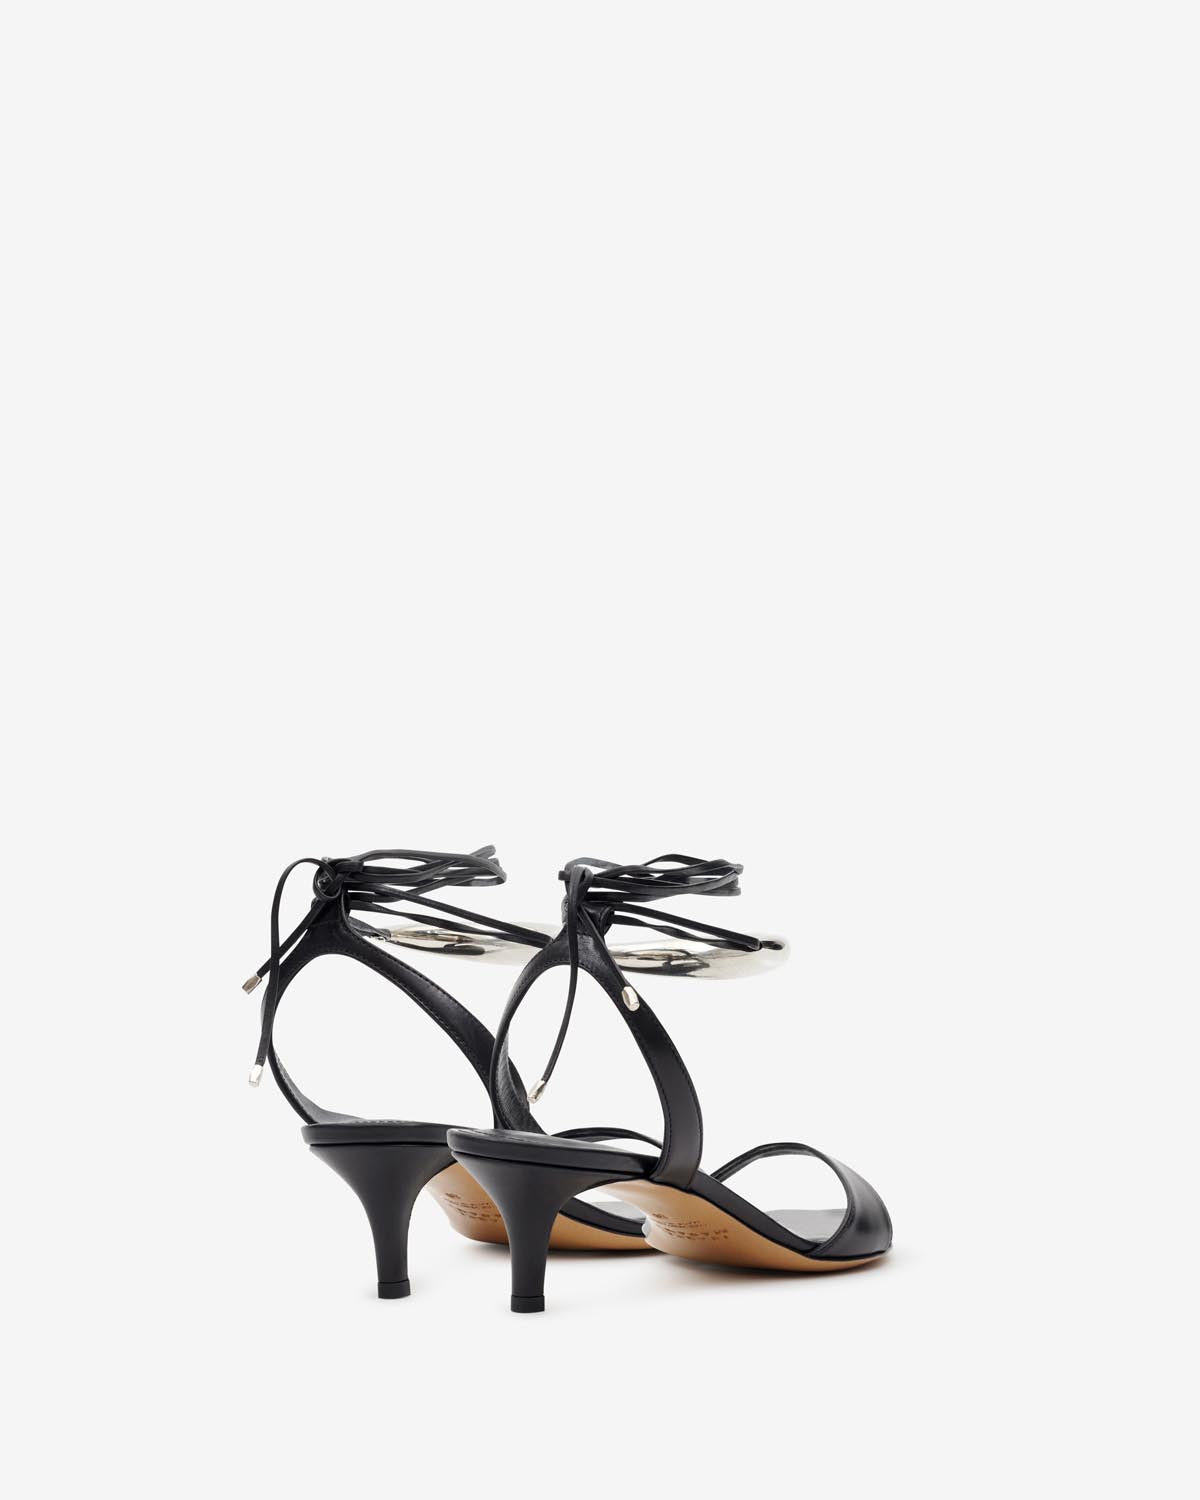 Alziry sandals Woman Black and silver 2